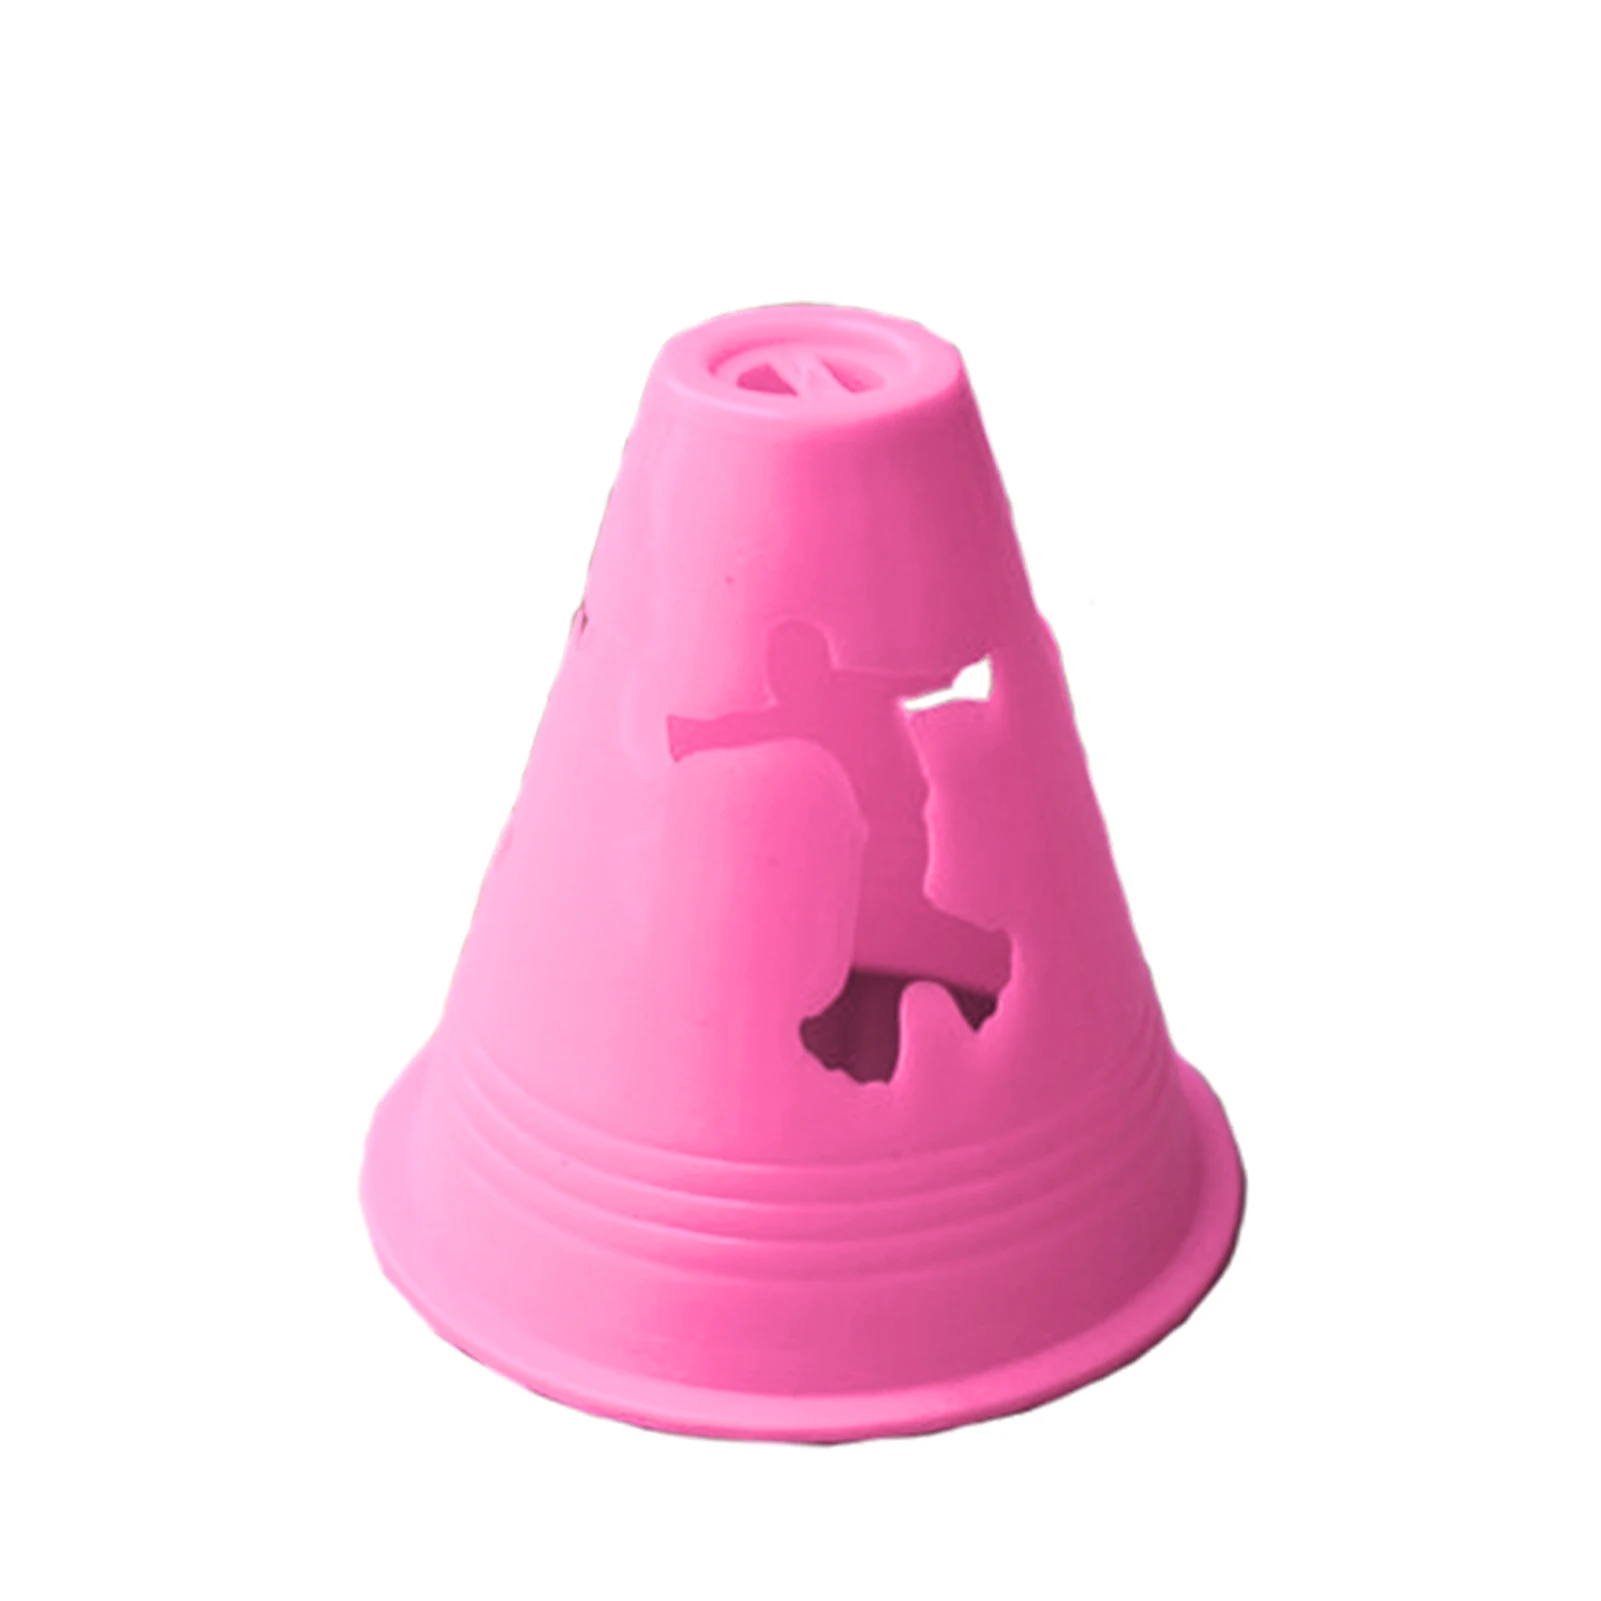 

20pcs/pack Skate Pile Cup Obstacle Practice Inline Football Training Sport Agility Free Slalom Cone Stadium Rugby Speed Marking